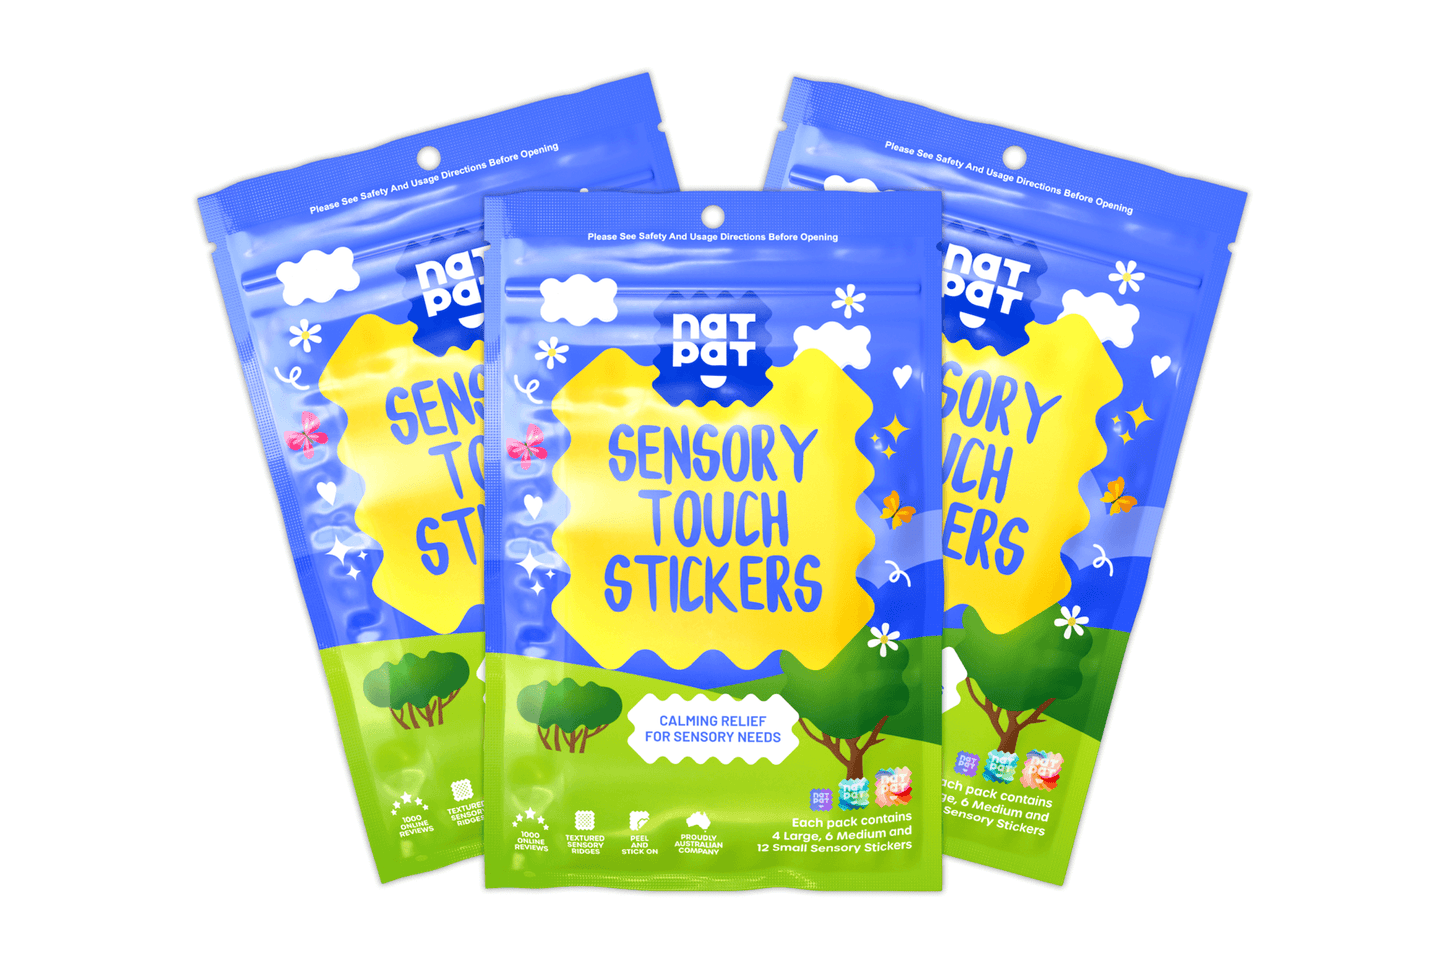 Sensory Touch Stickers